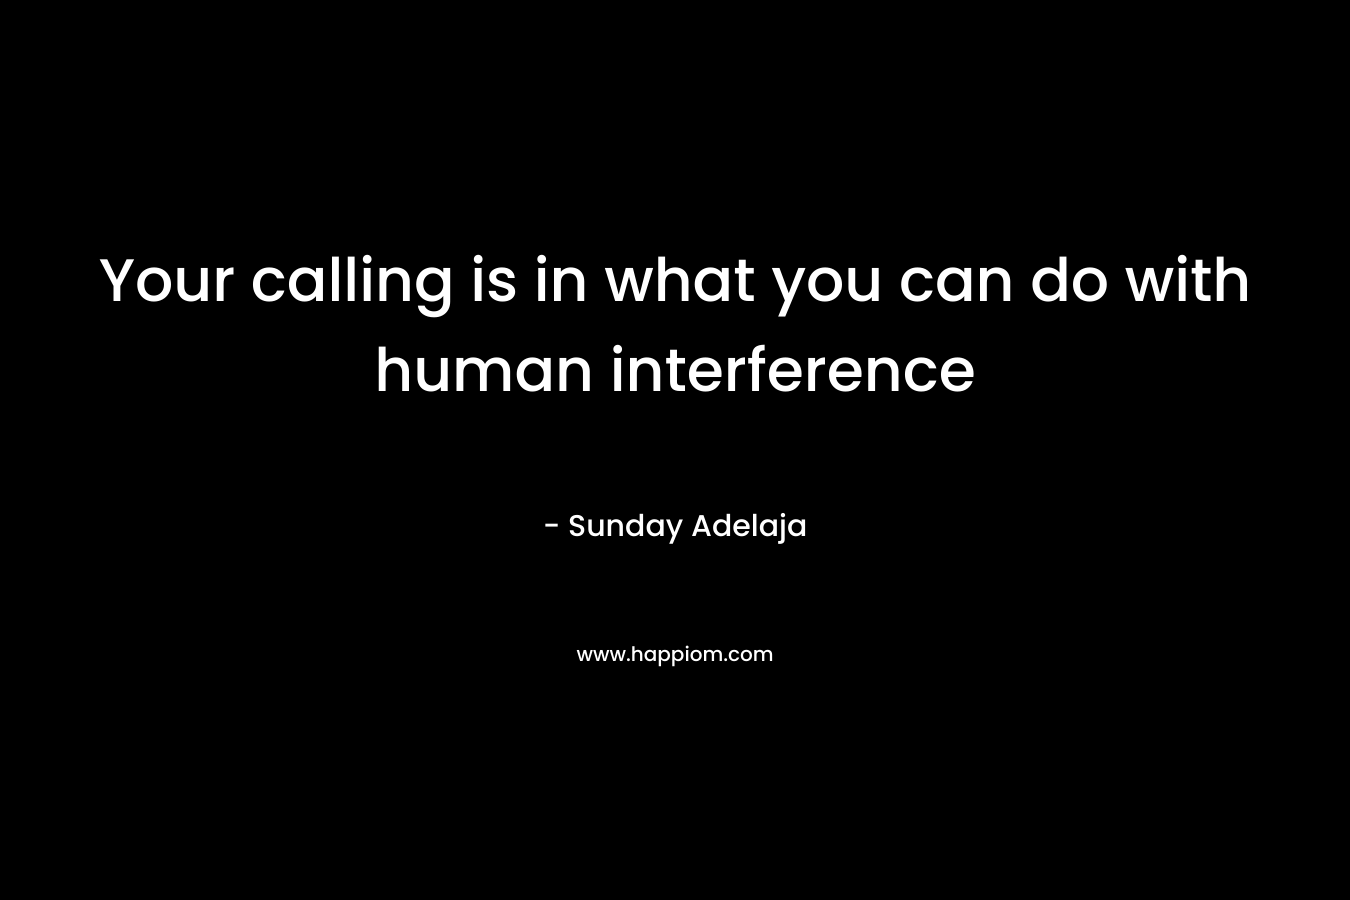 Your calling is in what you can do with human interference